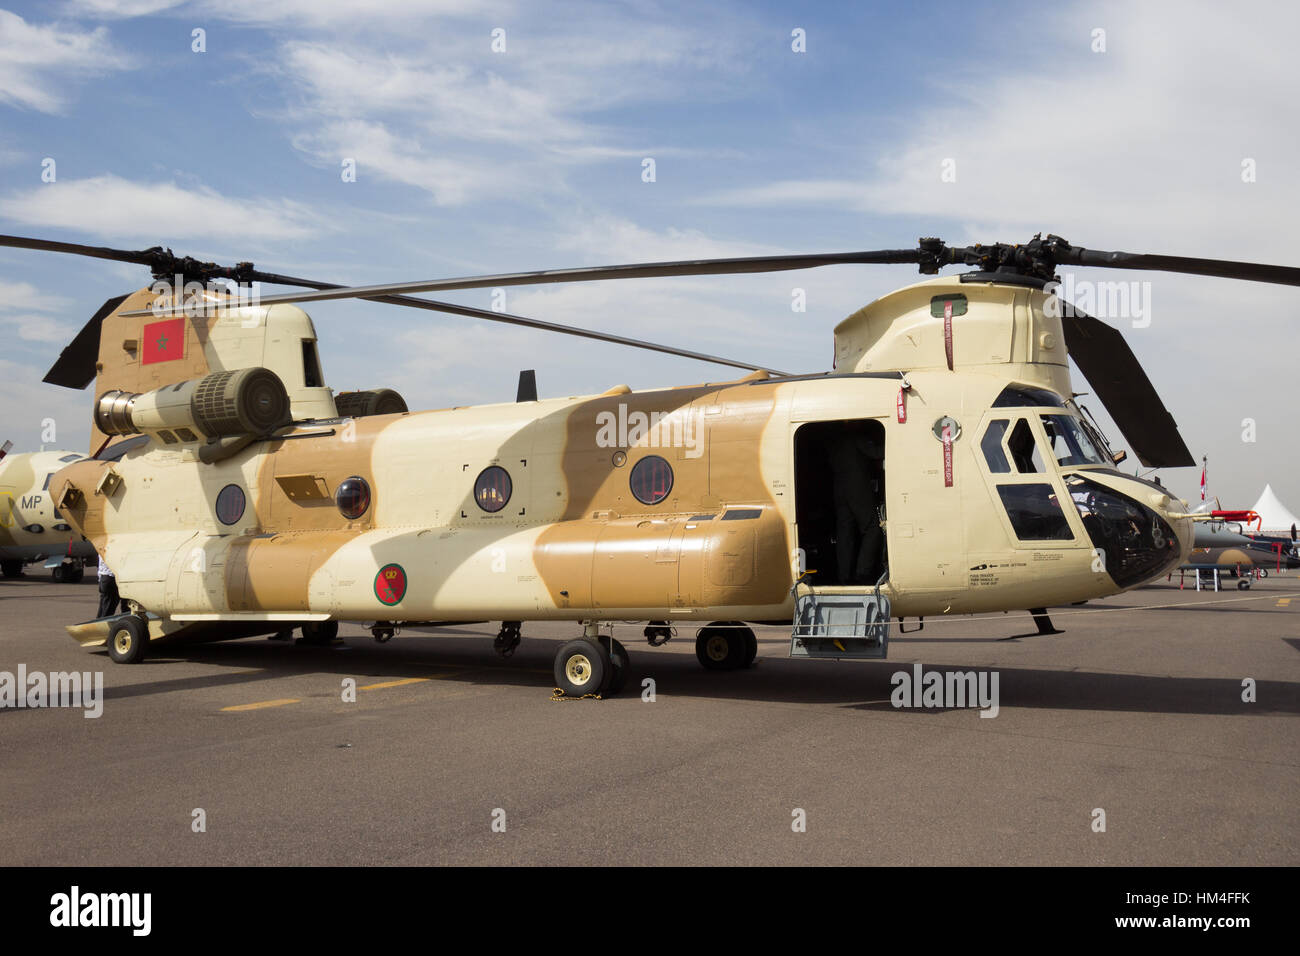 MARRAKECH, MOROCCO - APR 28, 2016: New CH-47D Chinook helicopter at the Marrakech Air Show Stock Photo